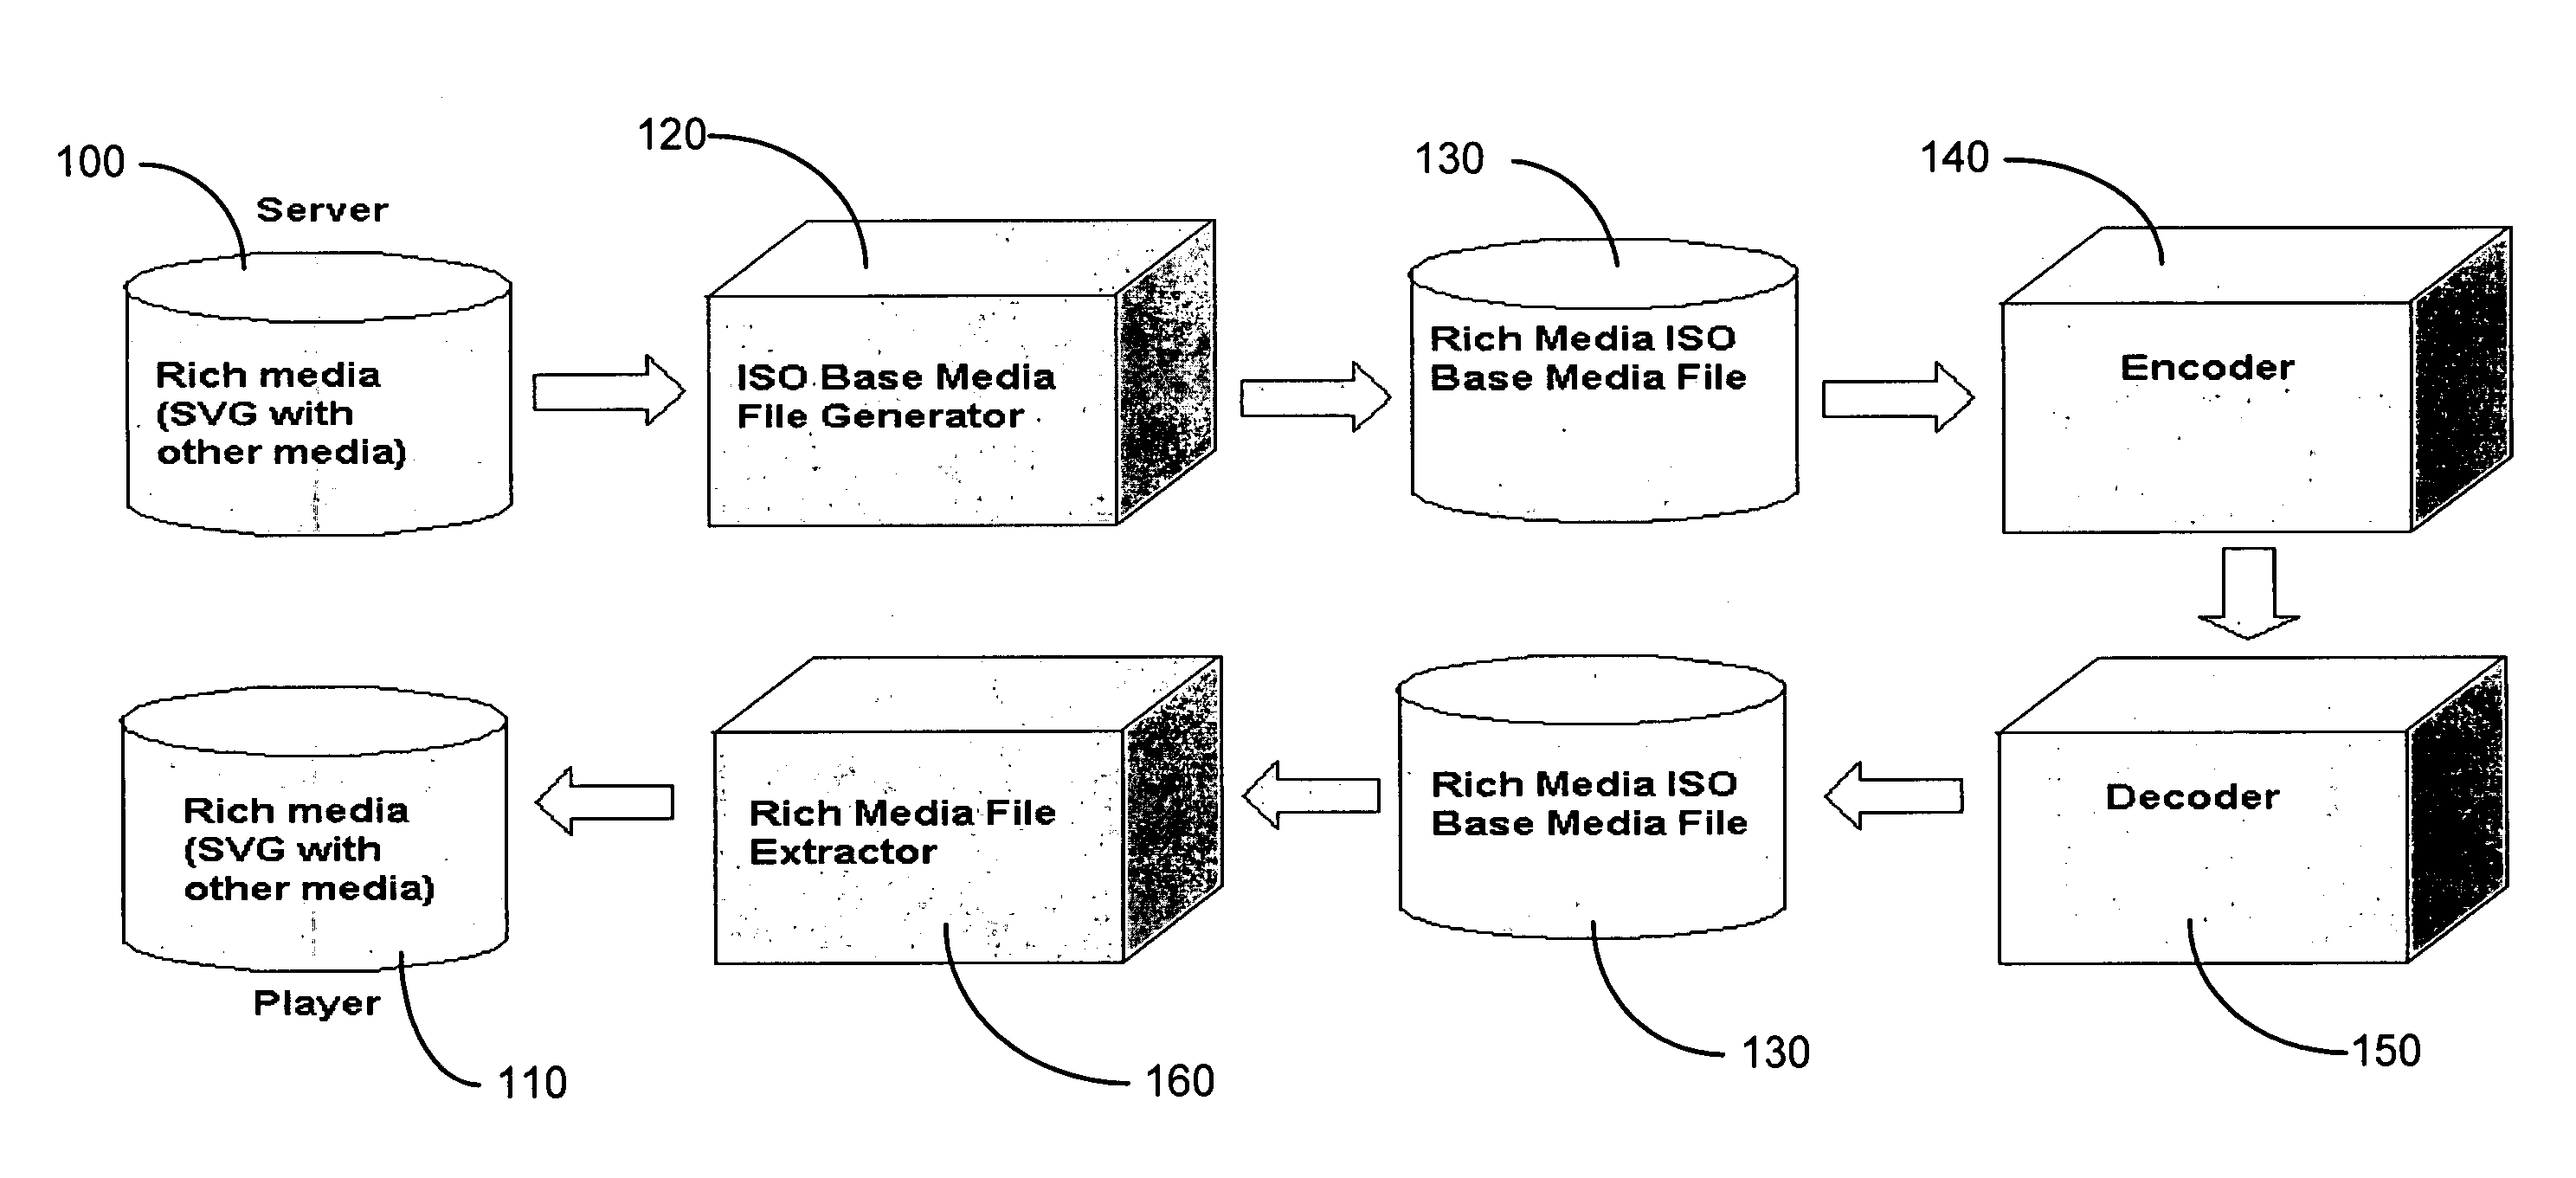 Method to embedding SVG content into ISO base media file format for progressive downloading and streaming of rich media content